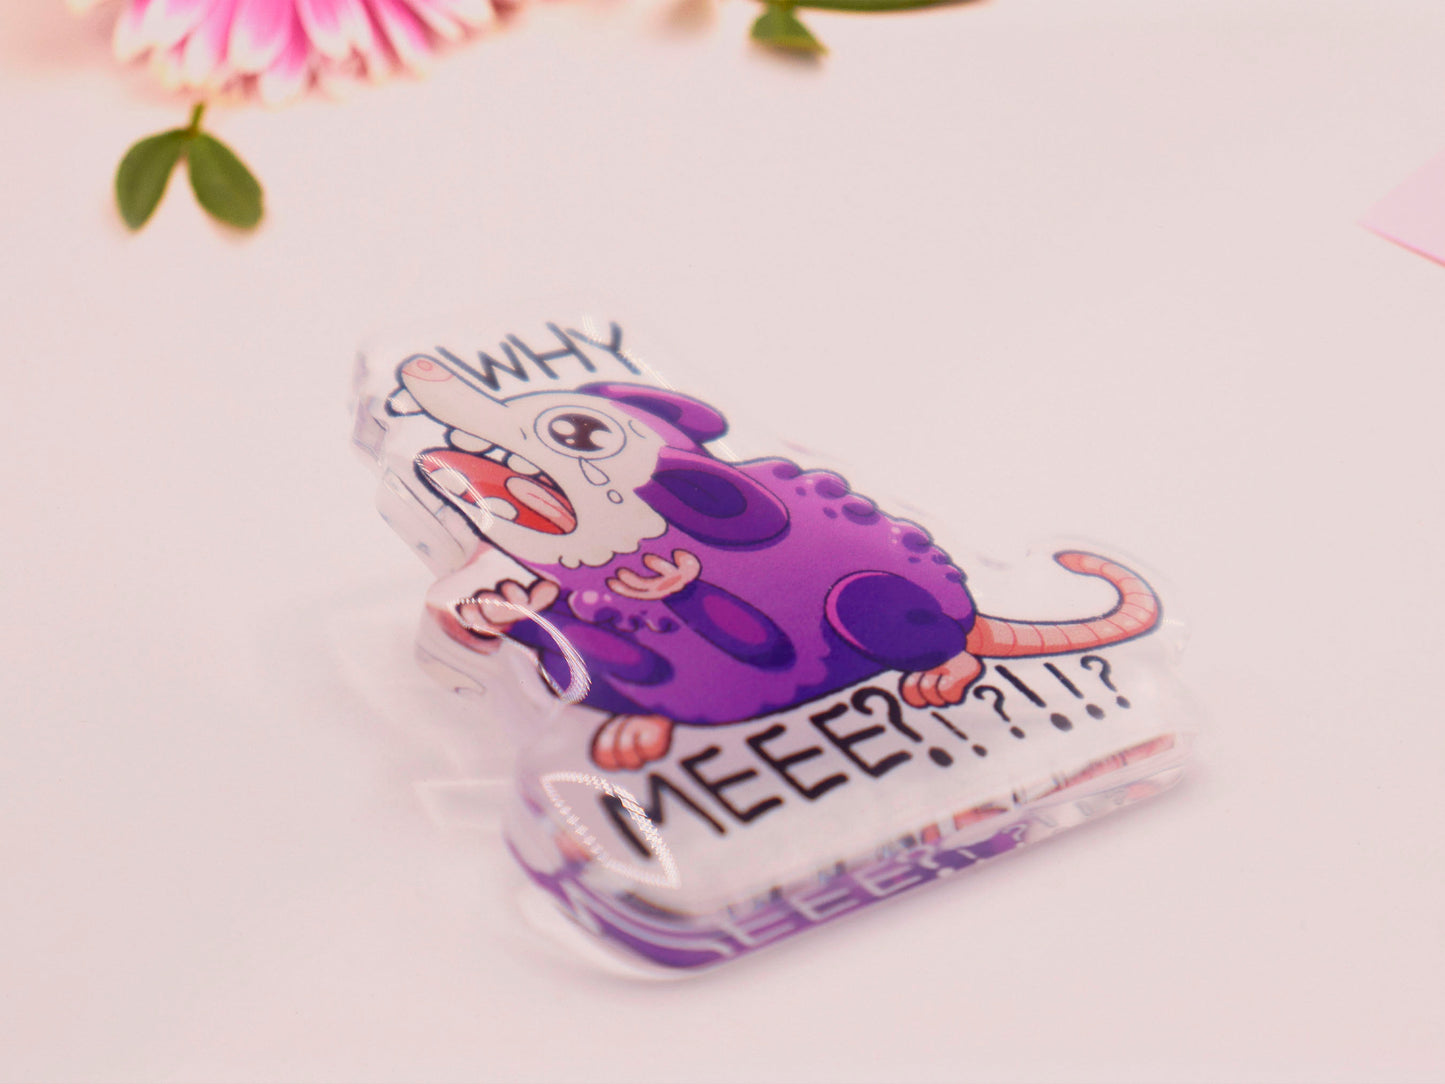 Acrylic pin badge of a crying and screaming possum with the text why me?!